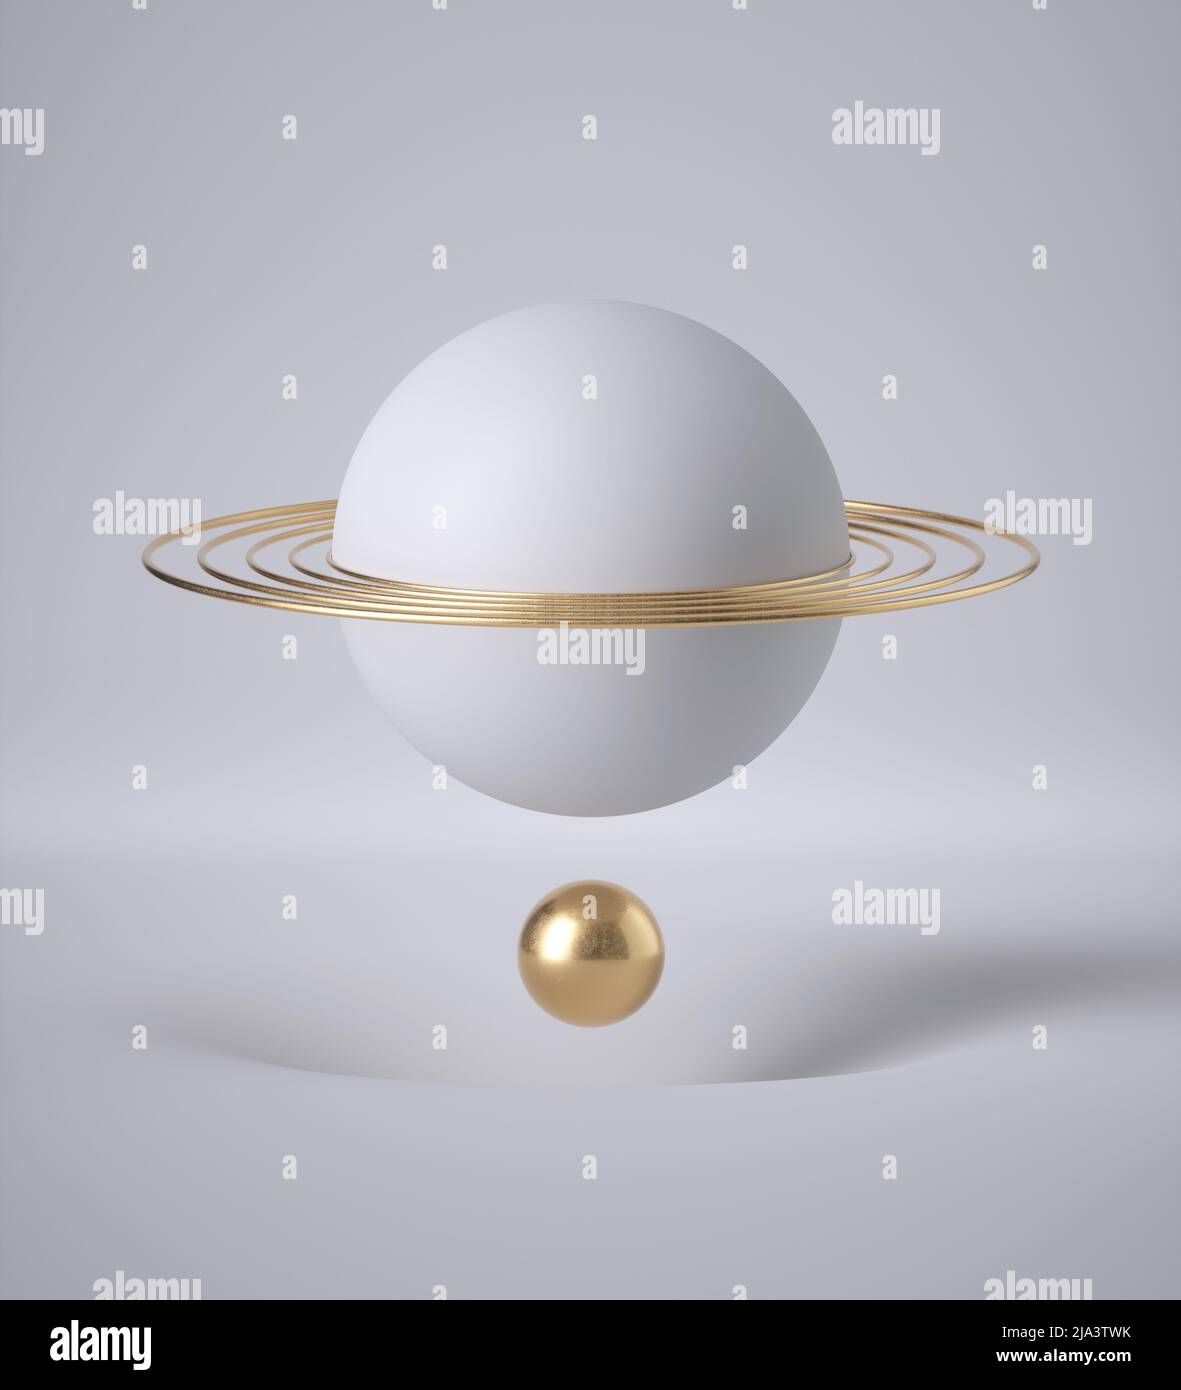 Abstract realistic futuristic planet round sphere against the background of  stars in space Stock Photo - Alamy